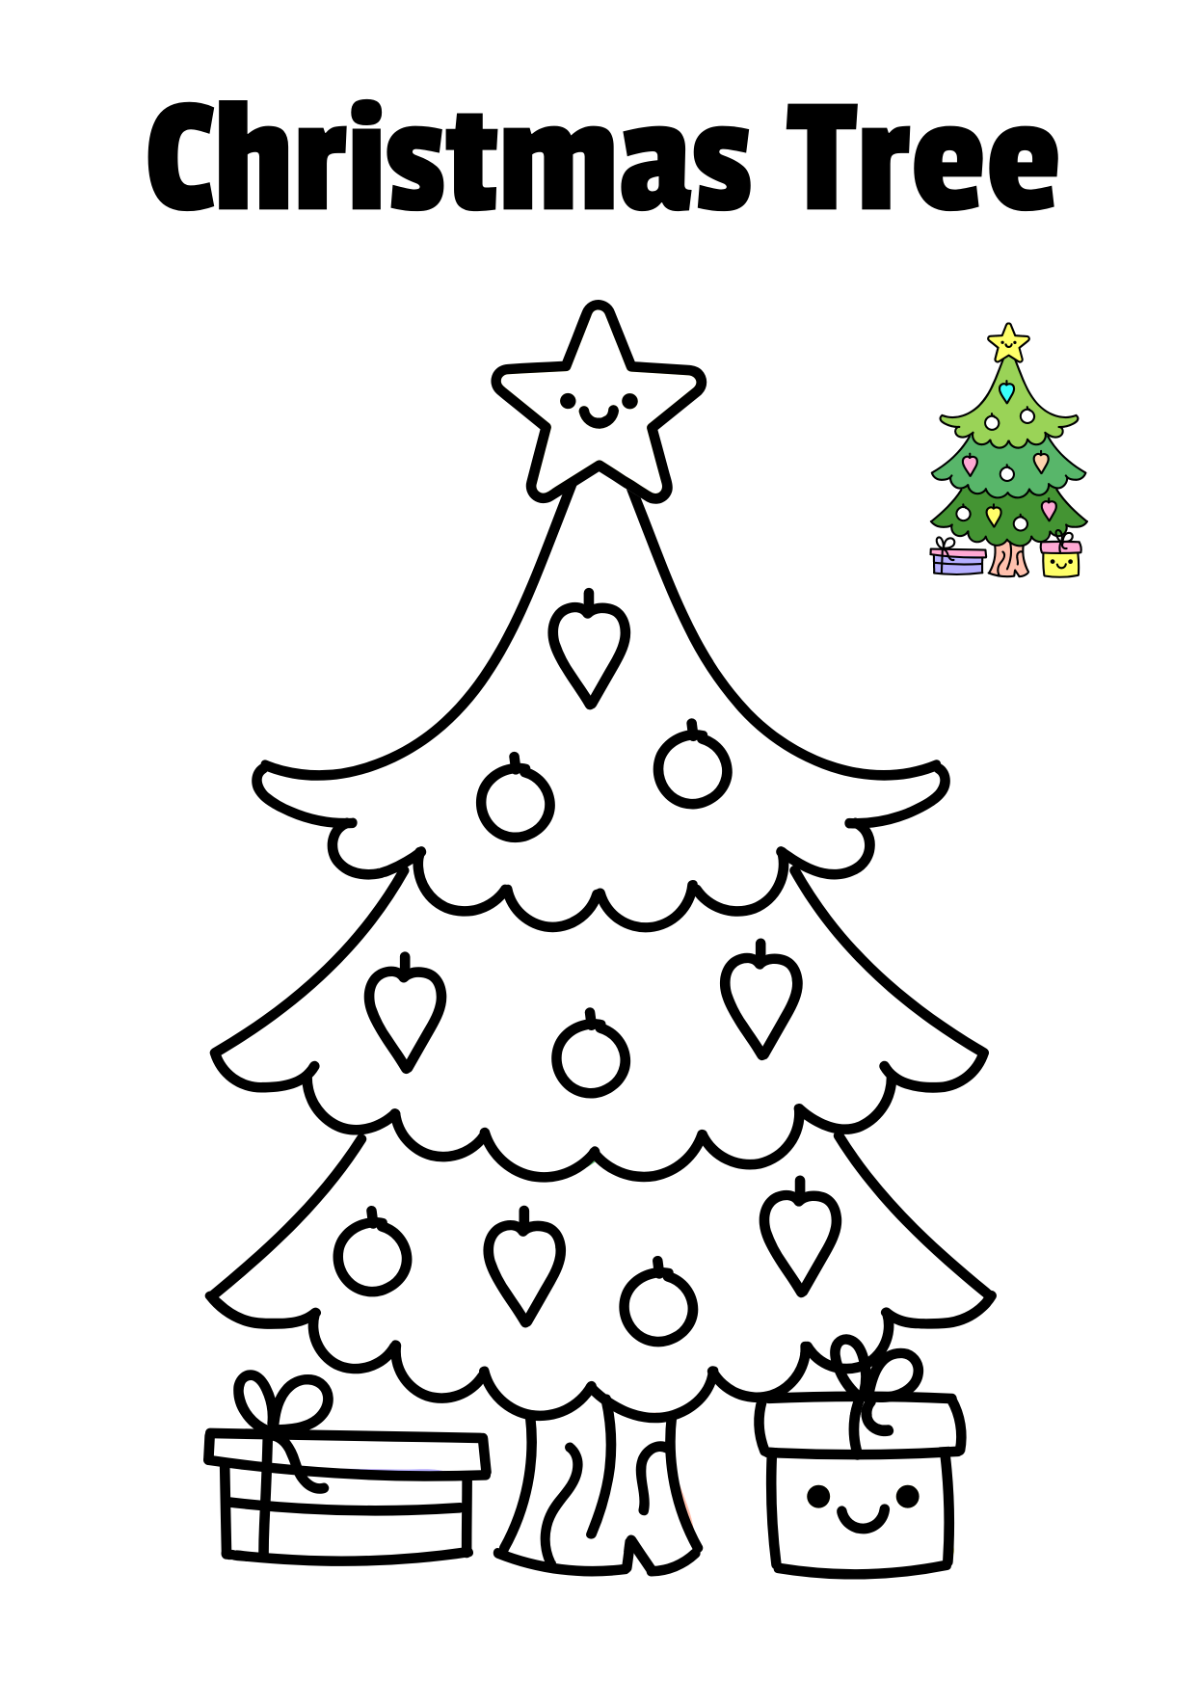 Christmas Tree Coloring Page Template